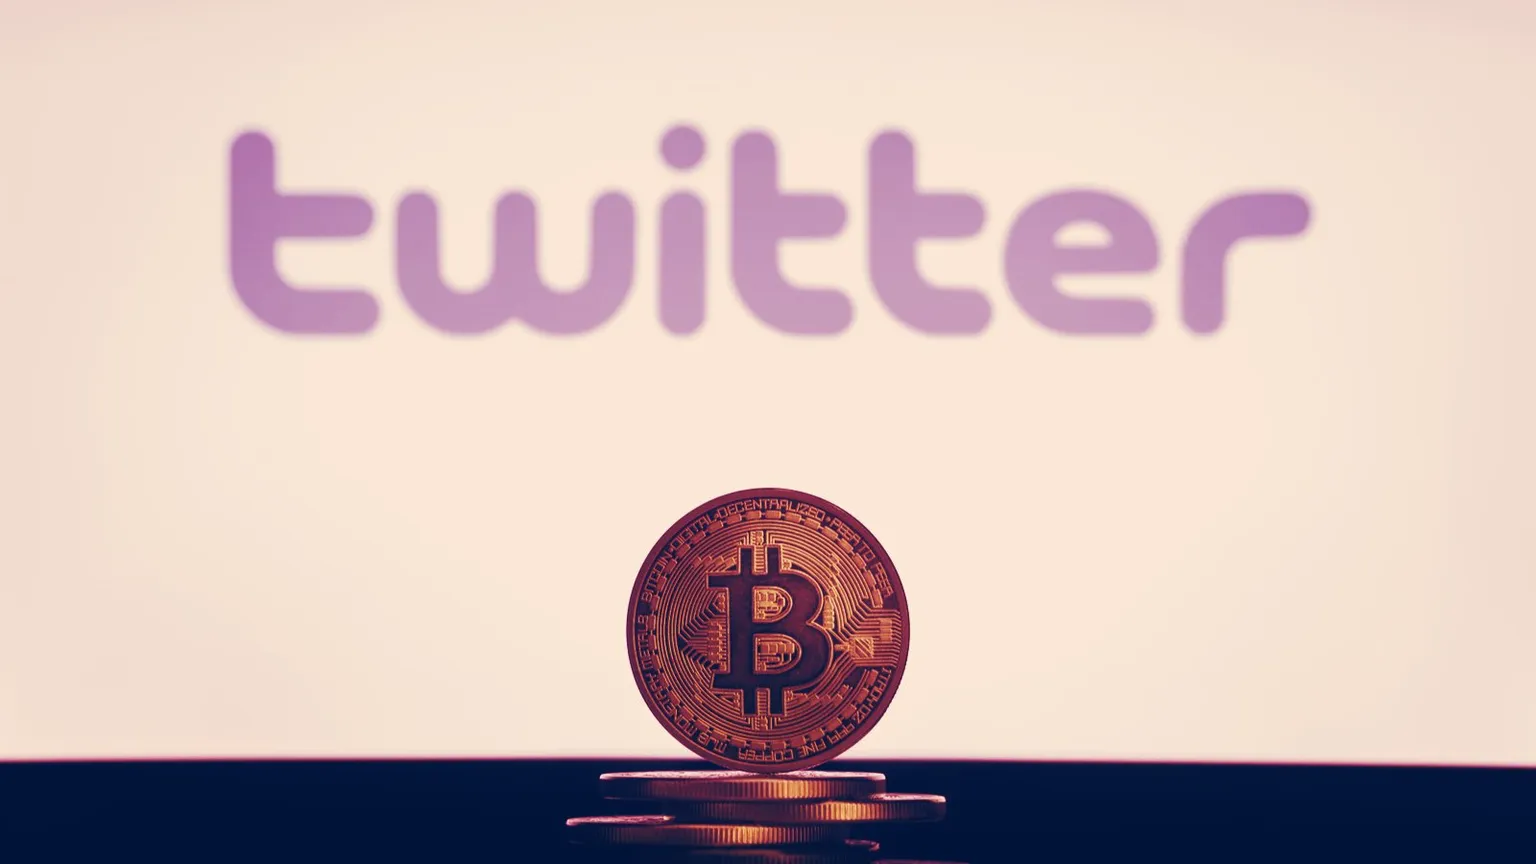 Bitcoin is popular among a subset of Twitter users. Image: Shutterstock